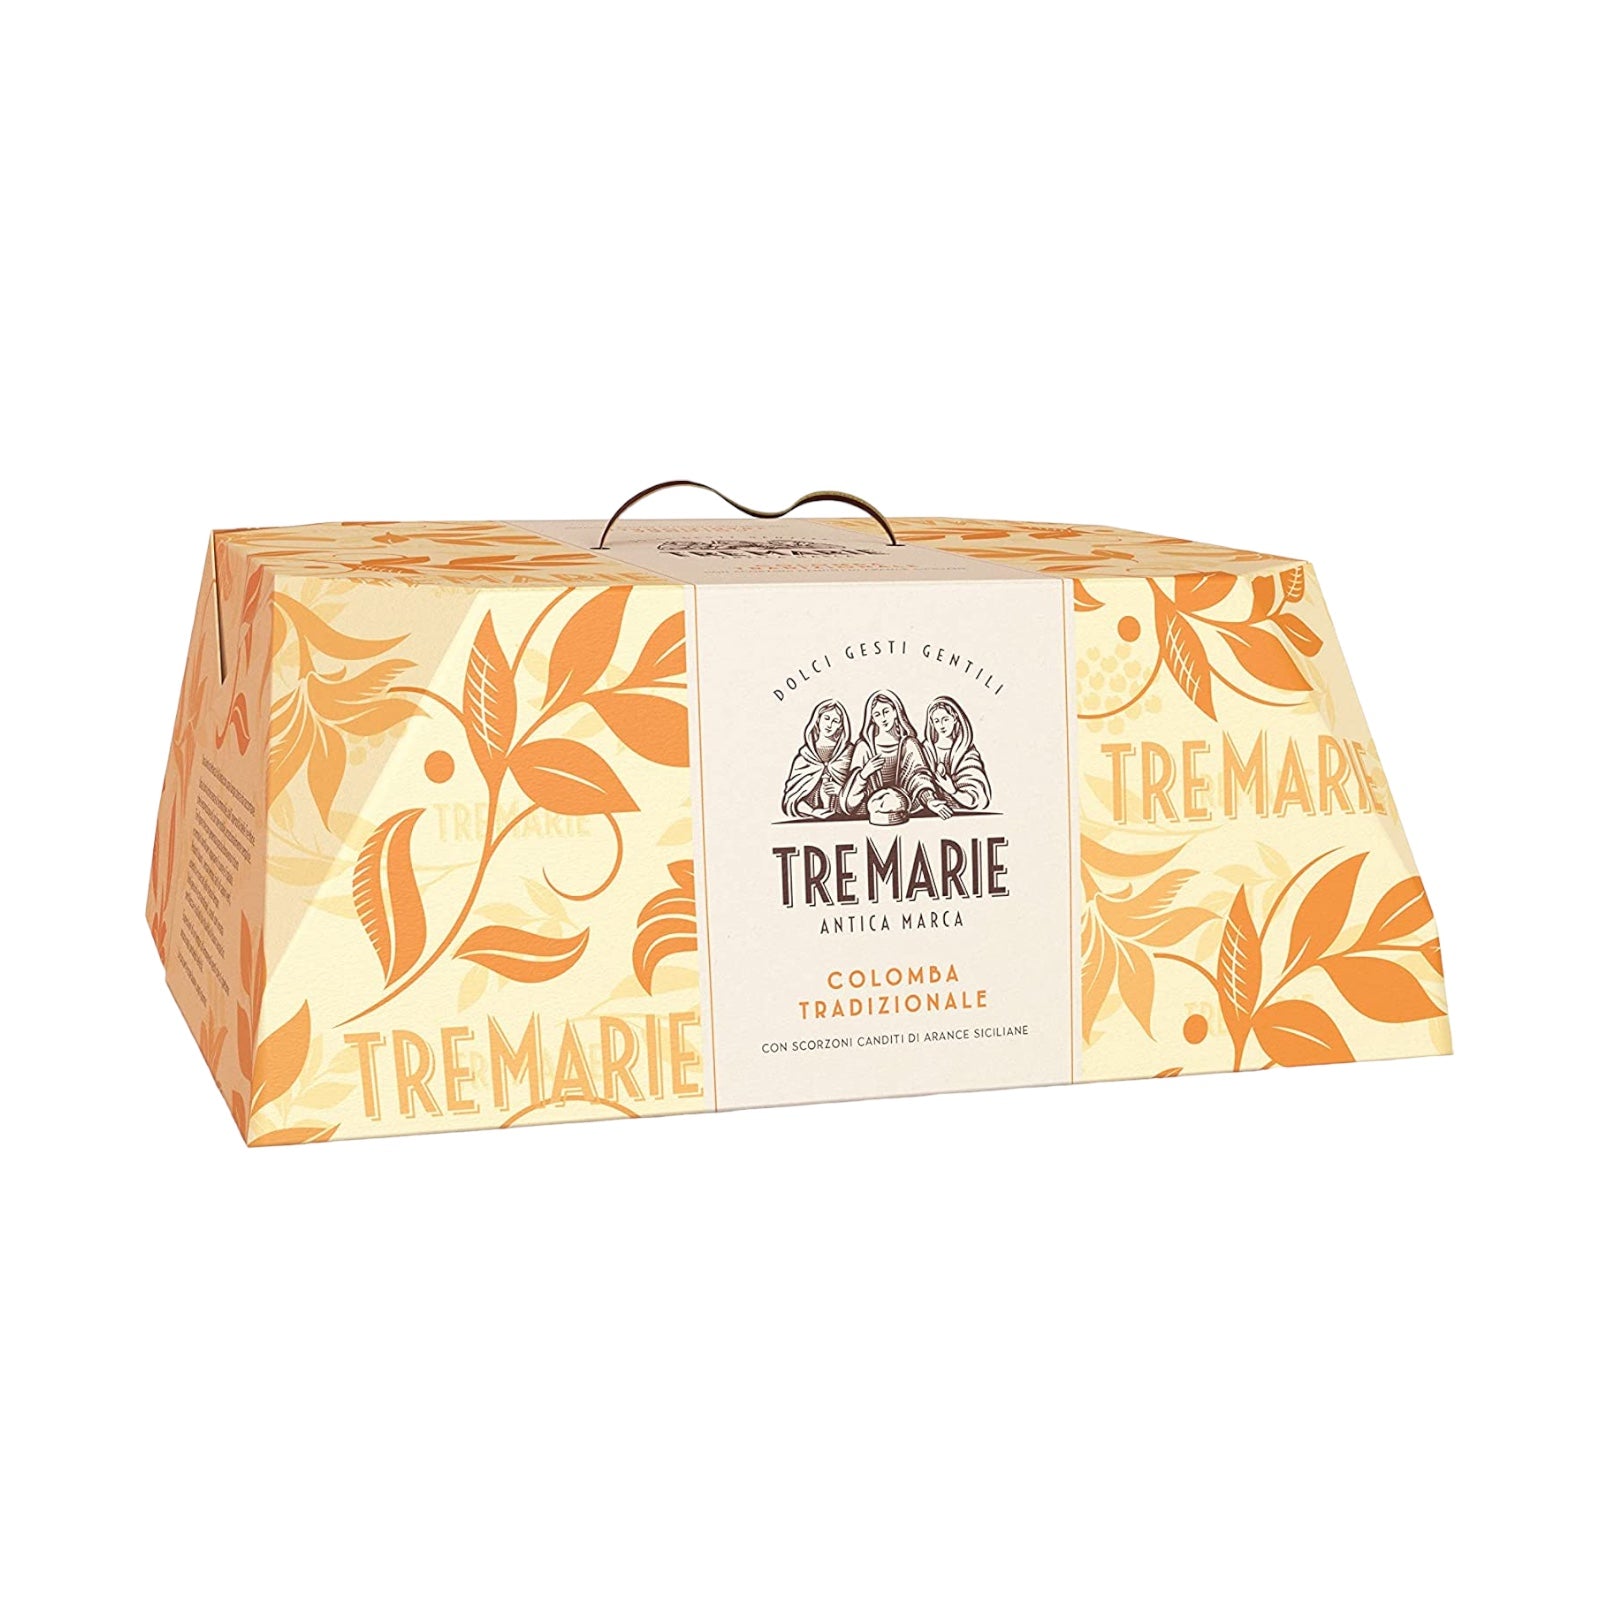 Colomba tradizionale Tre Marie Easter 750g